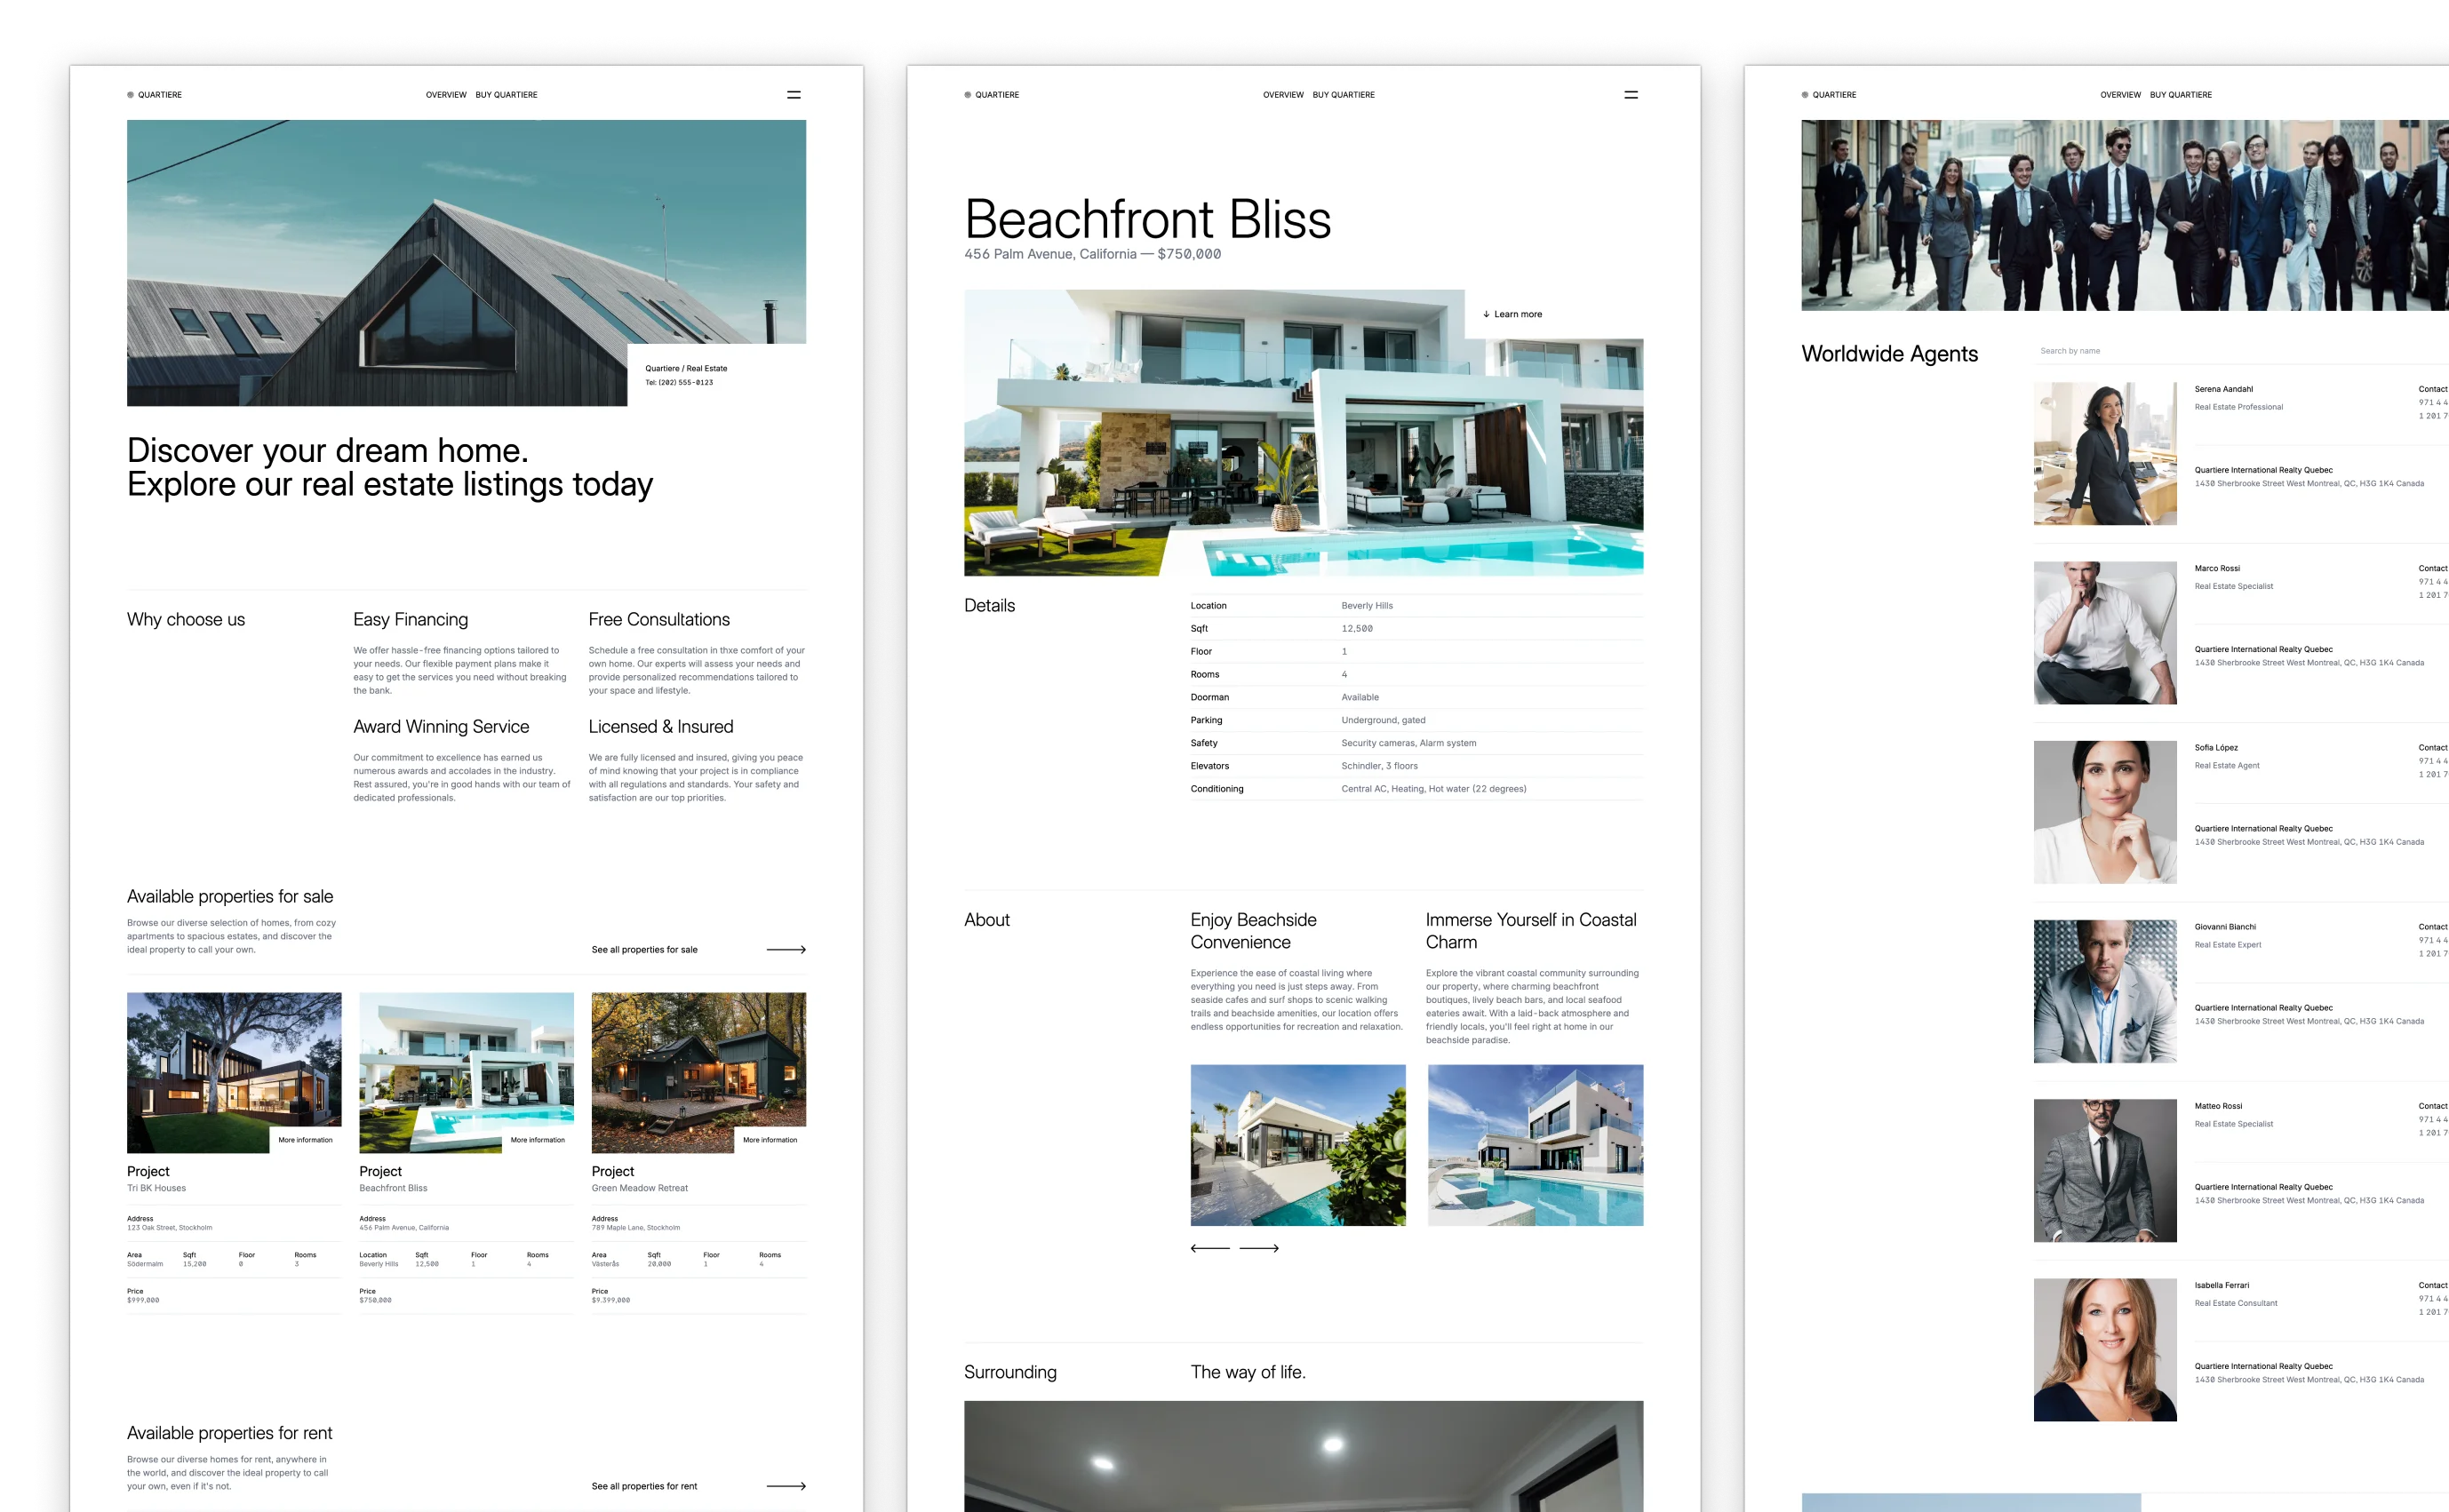 Quartiere theme for a real estate business, featuring a clean and modern design with a focus on portfolio showcase. It includes sections for project highlights, team profiles, client testimonials, and a contact form, emphasizing its suitability for real estate businesses.